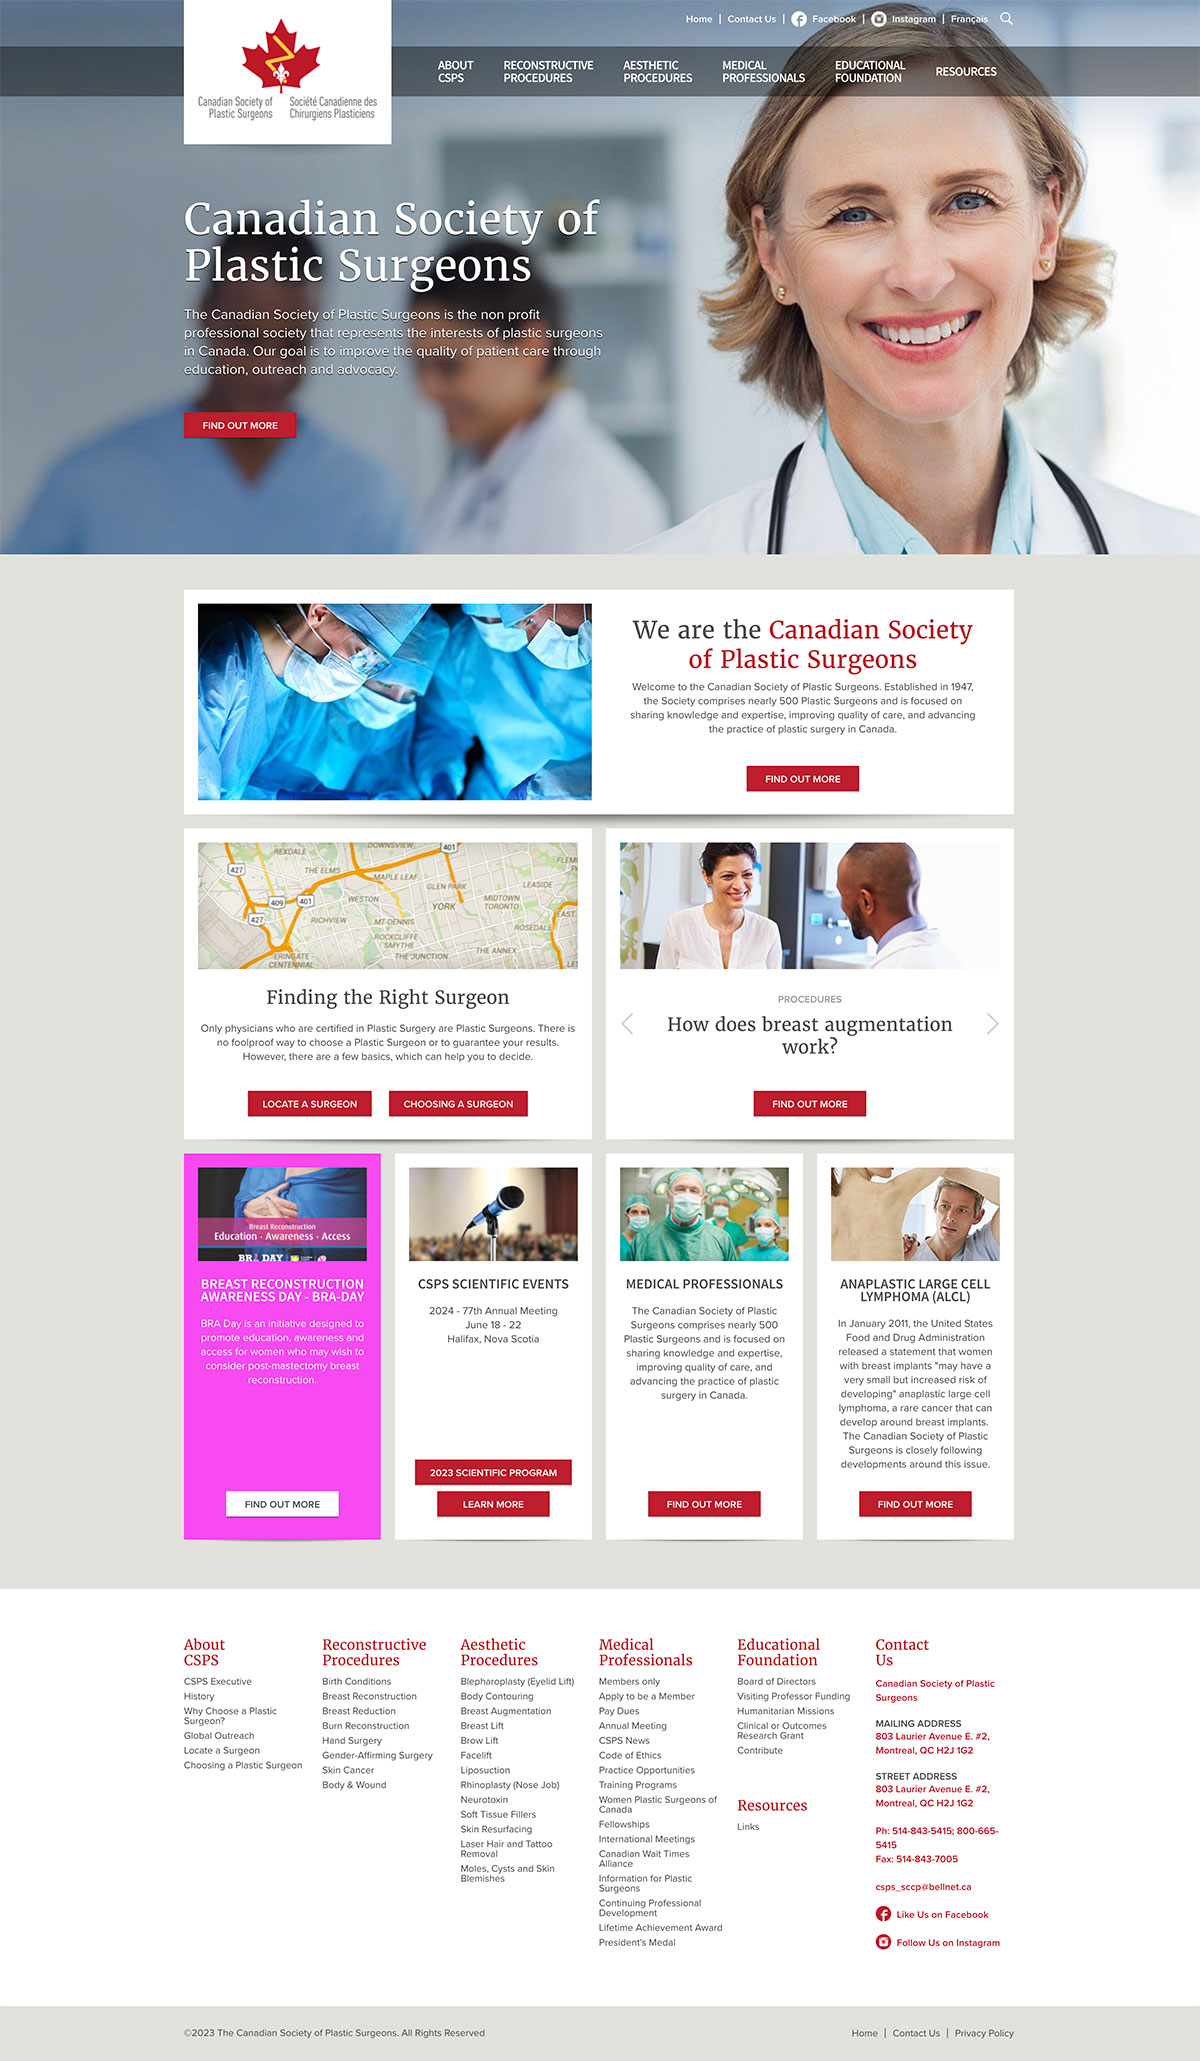 One-Marketing client - Canadian-Society-of-Plastic-Surgeons - website sample 1